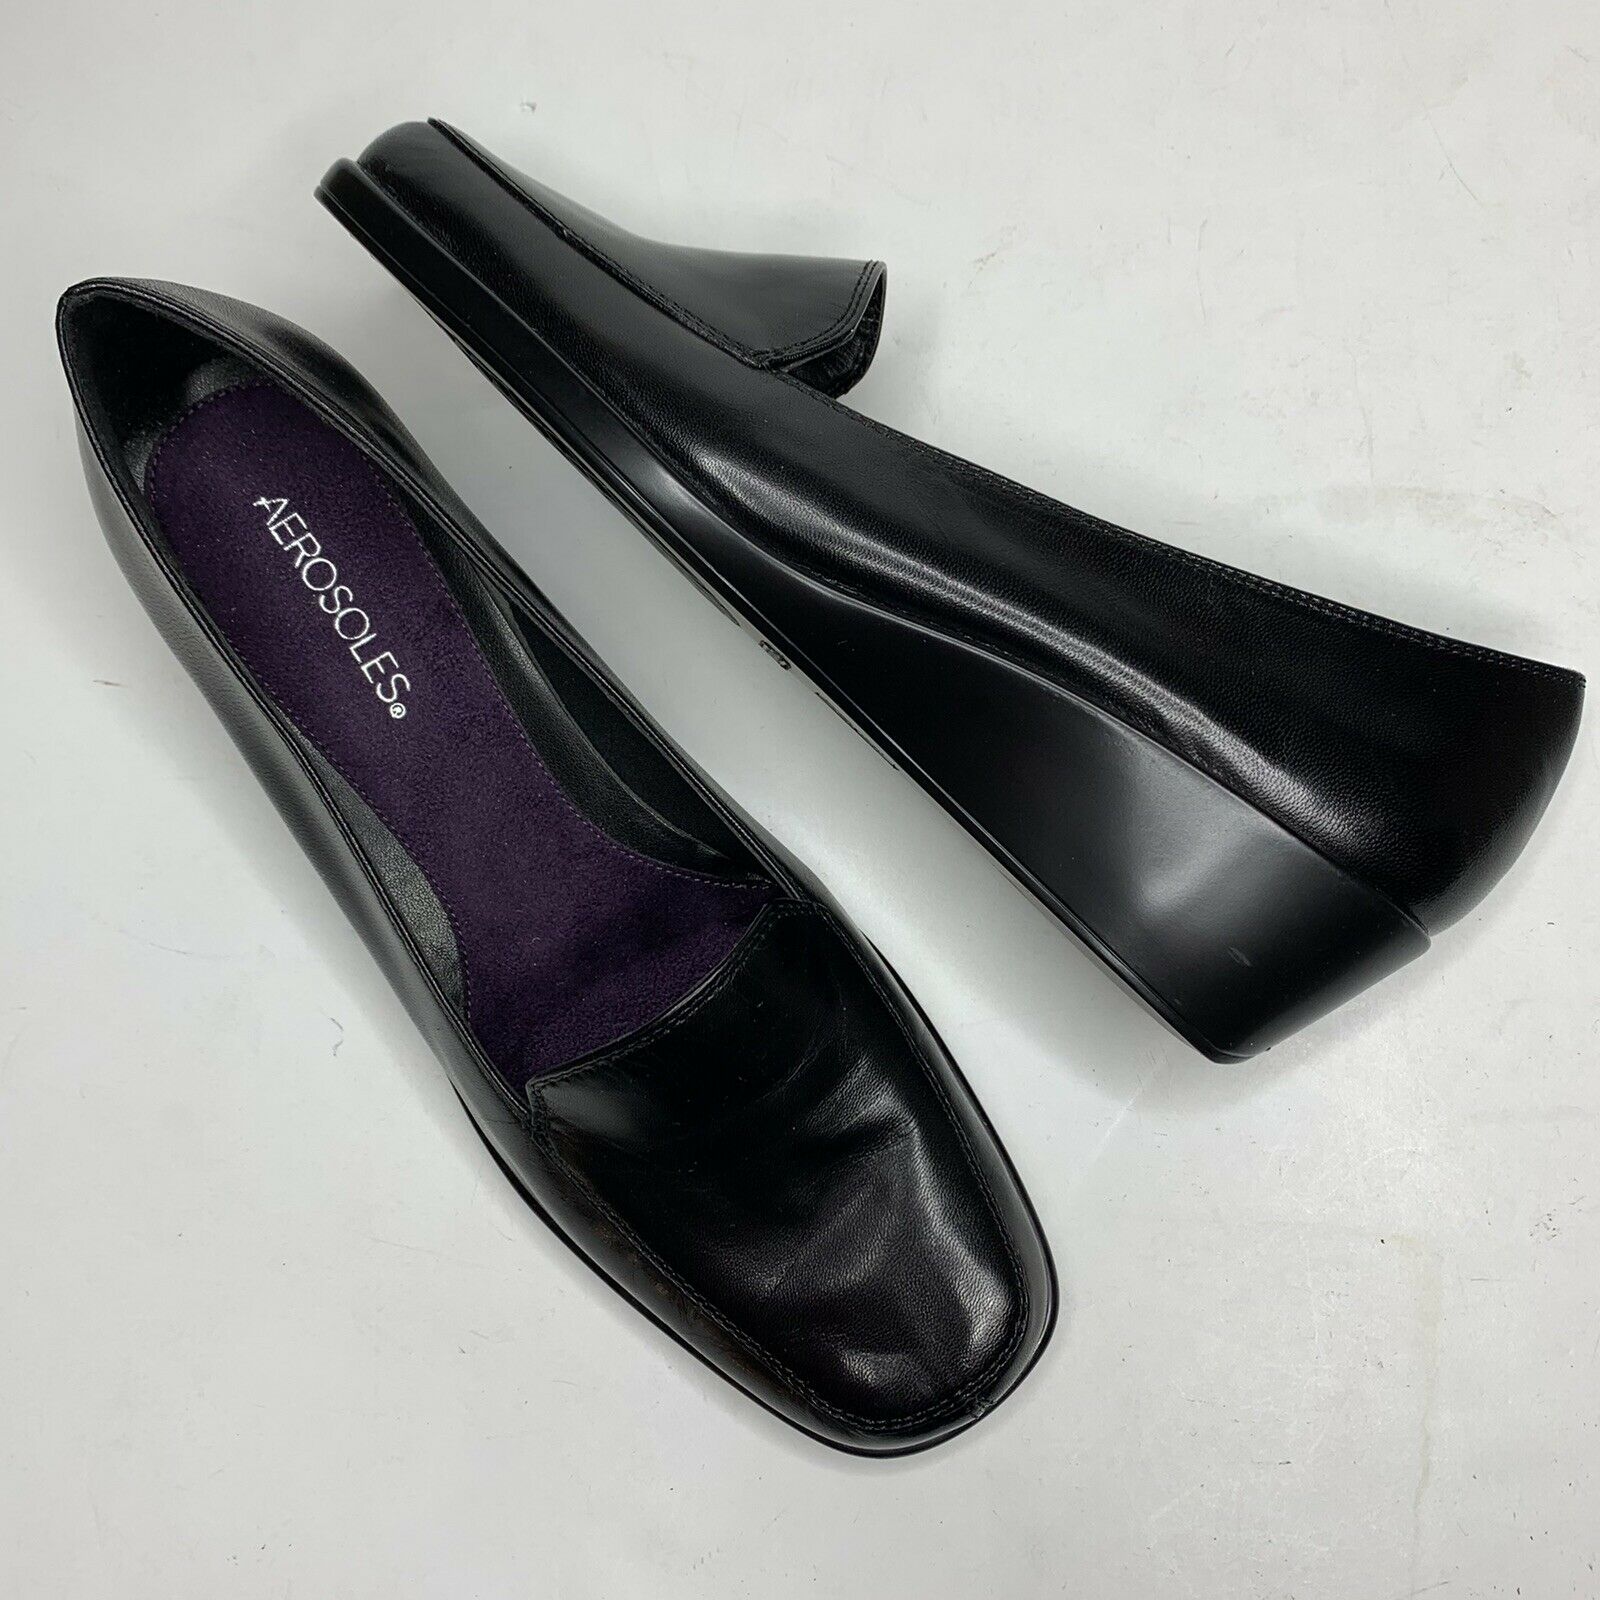 Aerosoles Final Exam Black Patent Leather Wedge Loafers Shoes Women’s Size 9.5 M